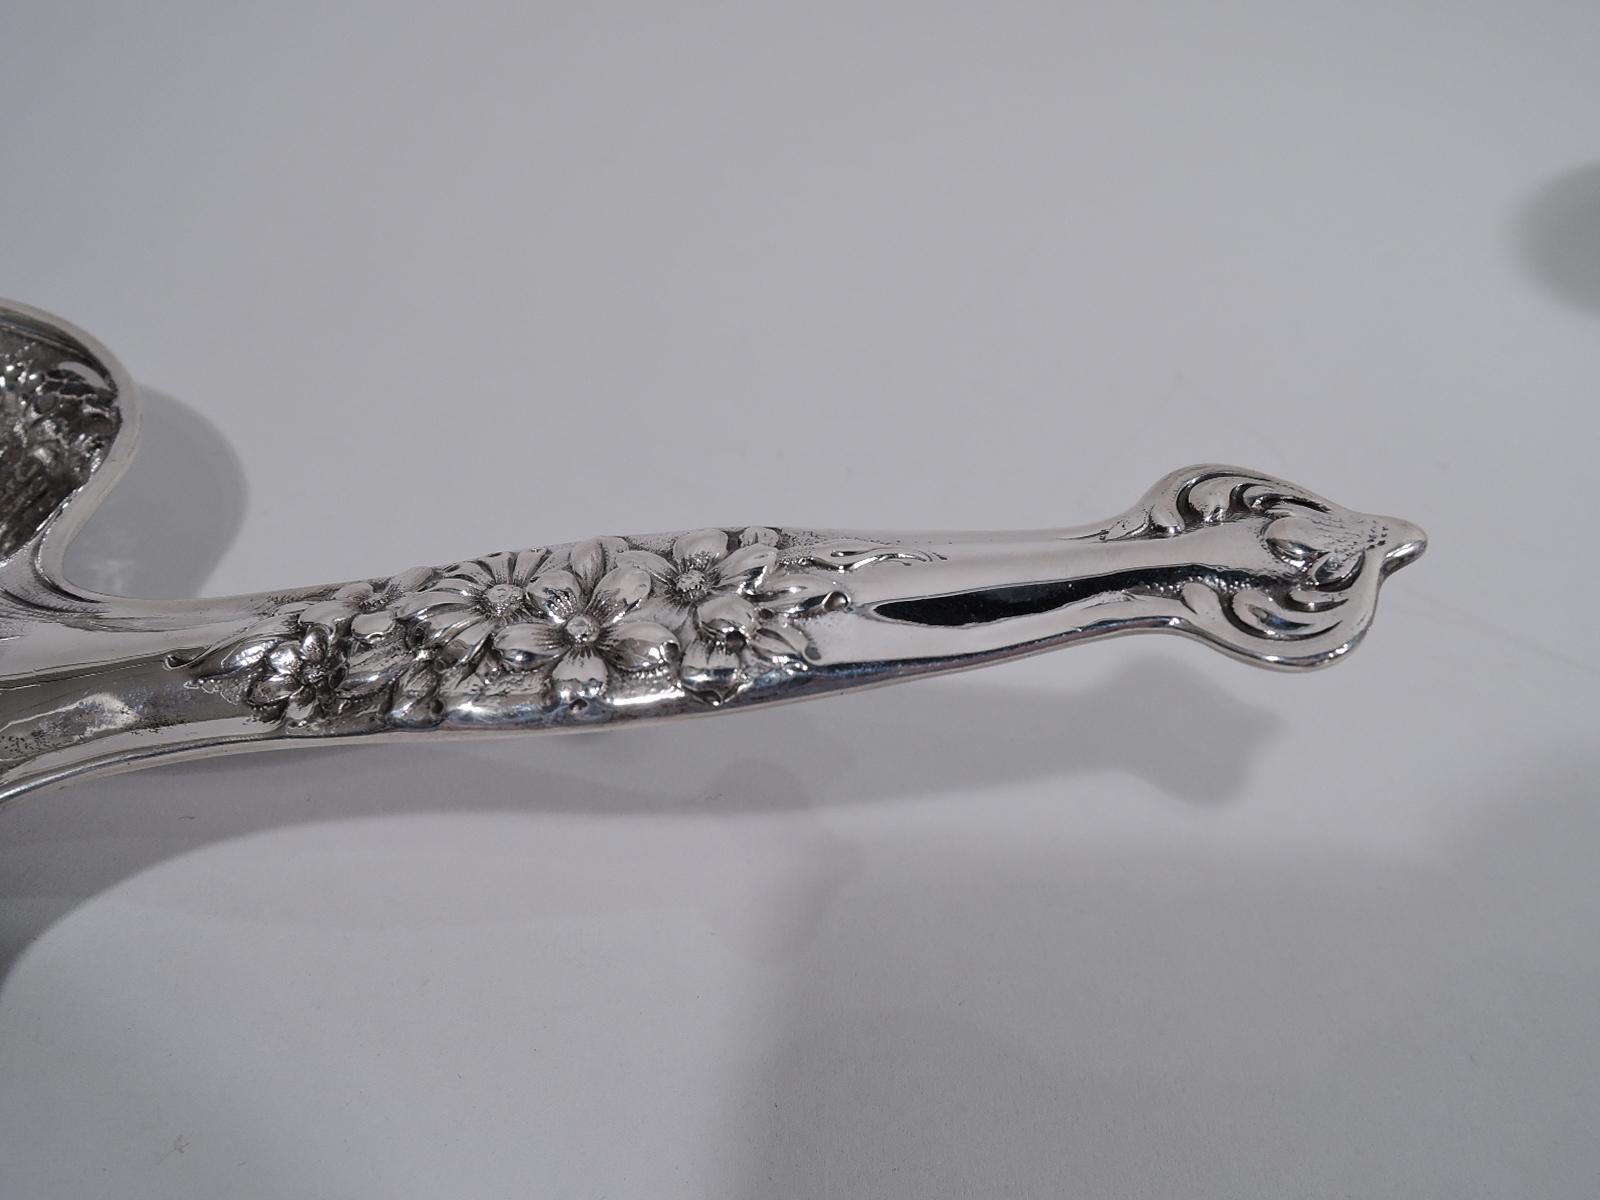 American Rare Tiffany Repousse Sterling Silver Chamberstick with Snuffer